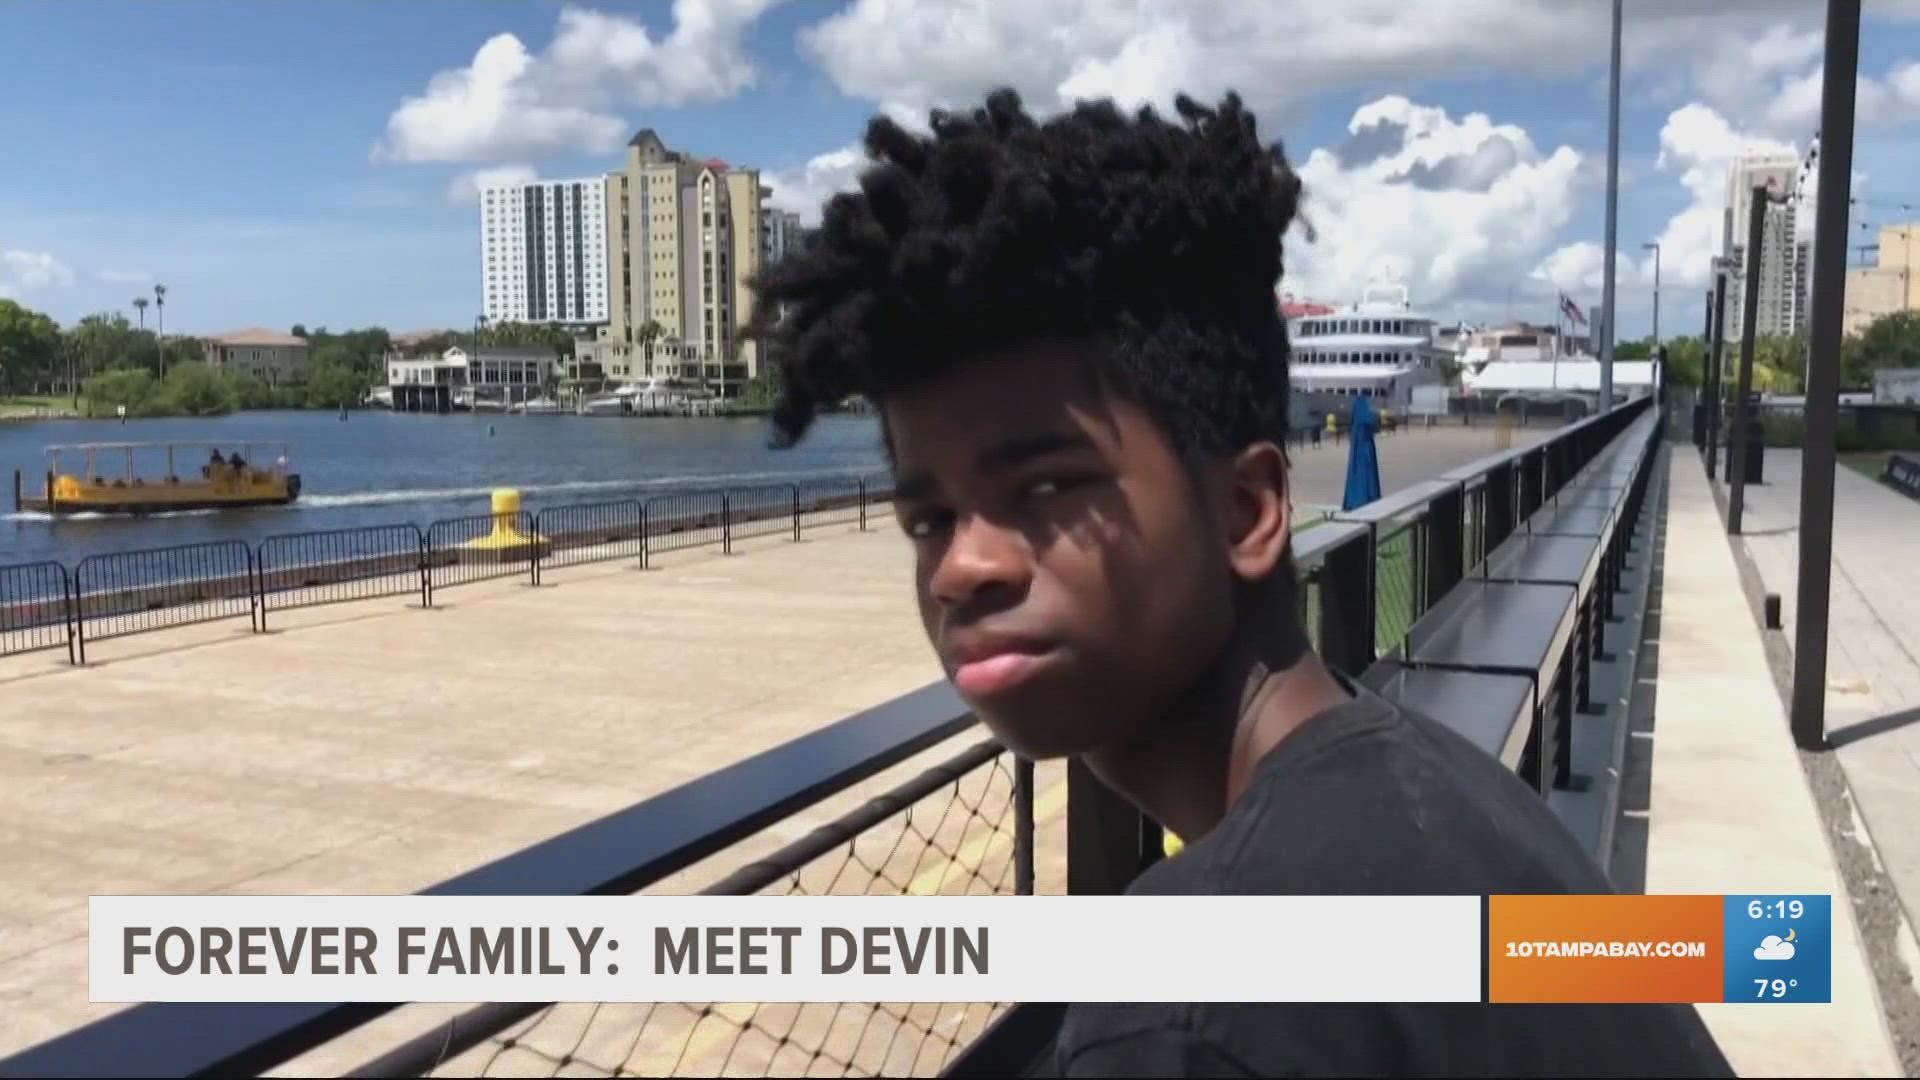 Devin is an aspiring actor with many interests including sports and science whose greatest hope is to find a forever home. Adoption from foster care is free.